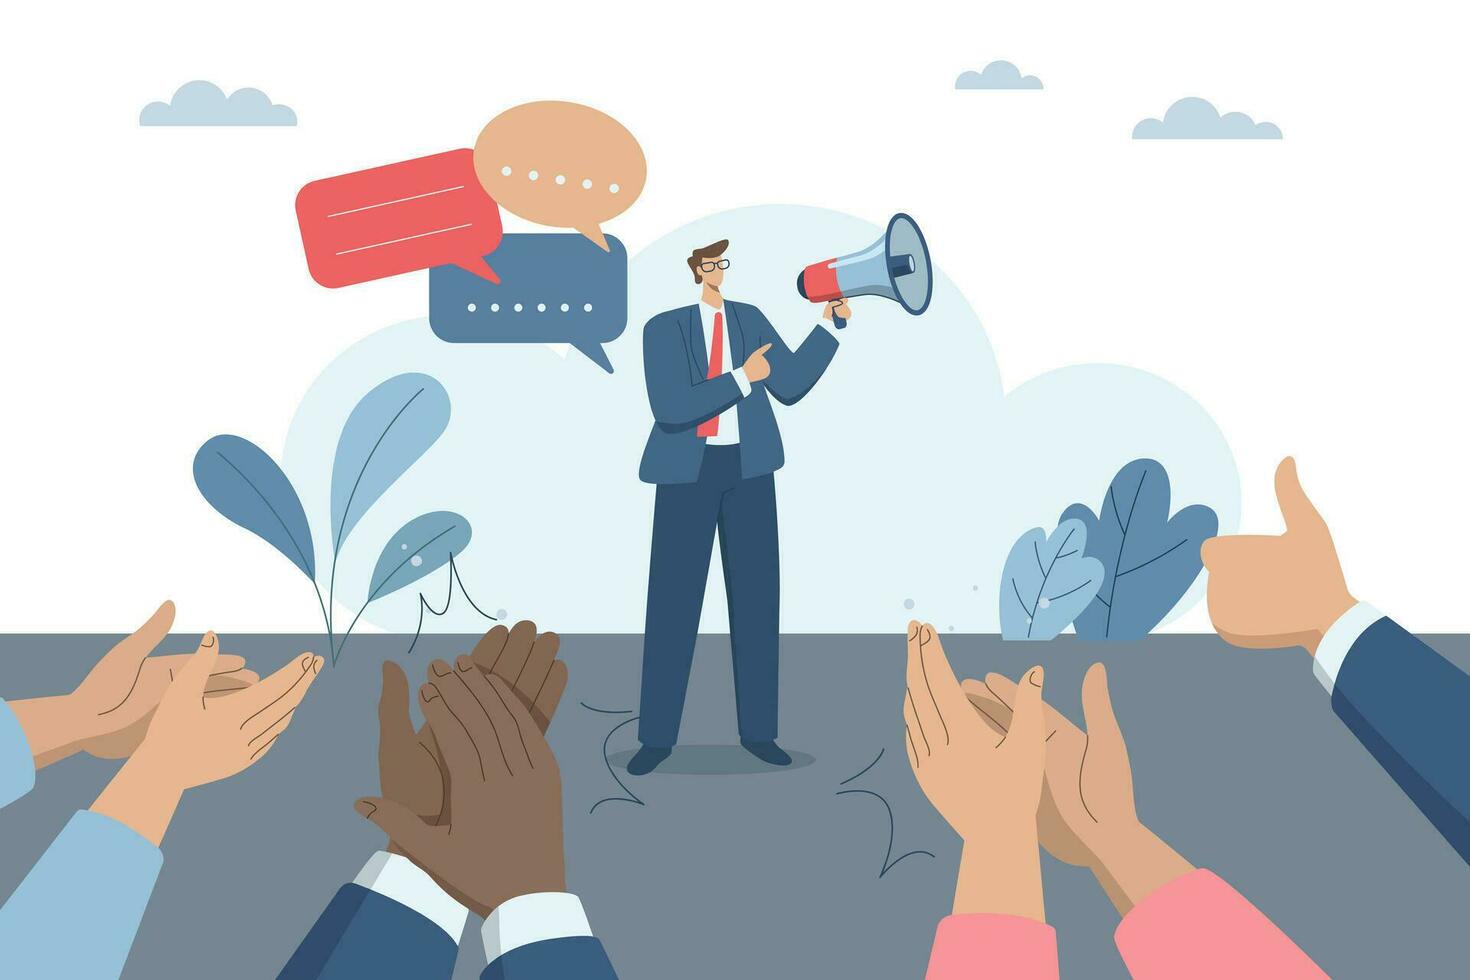 Discussion, Speaking at meeting, Productive conversation or discussion in the workplace, Colleagues applaud in appreciation for wonderful speech. Businessman uses megaphone to speak. Vector design.